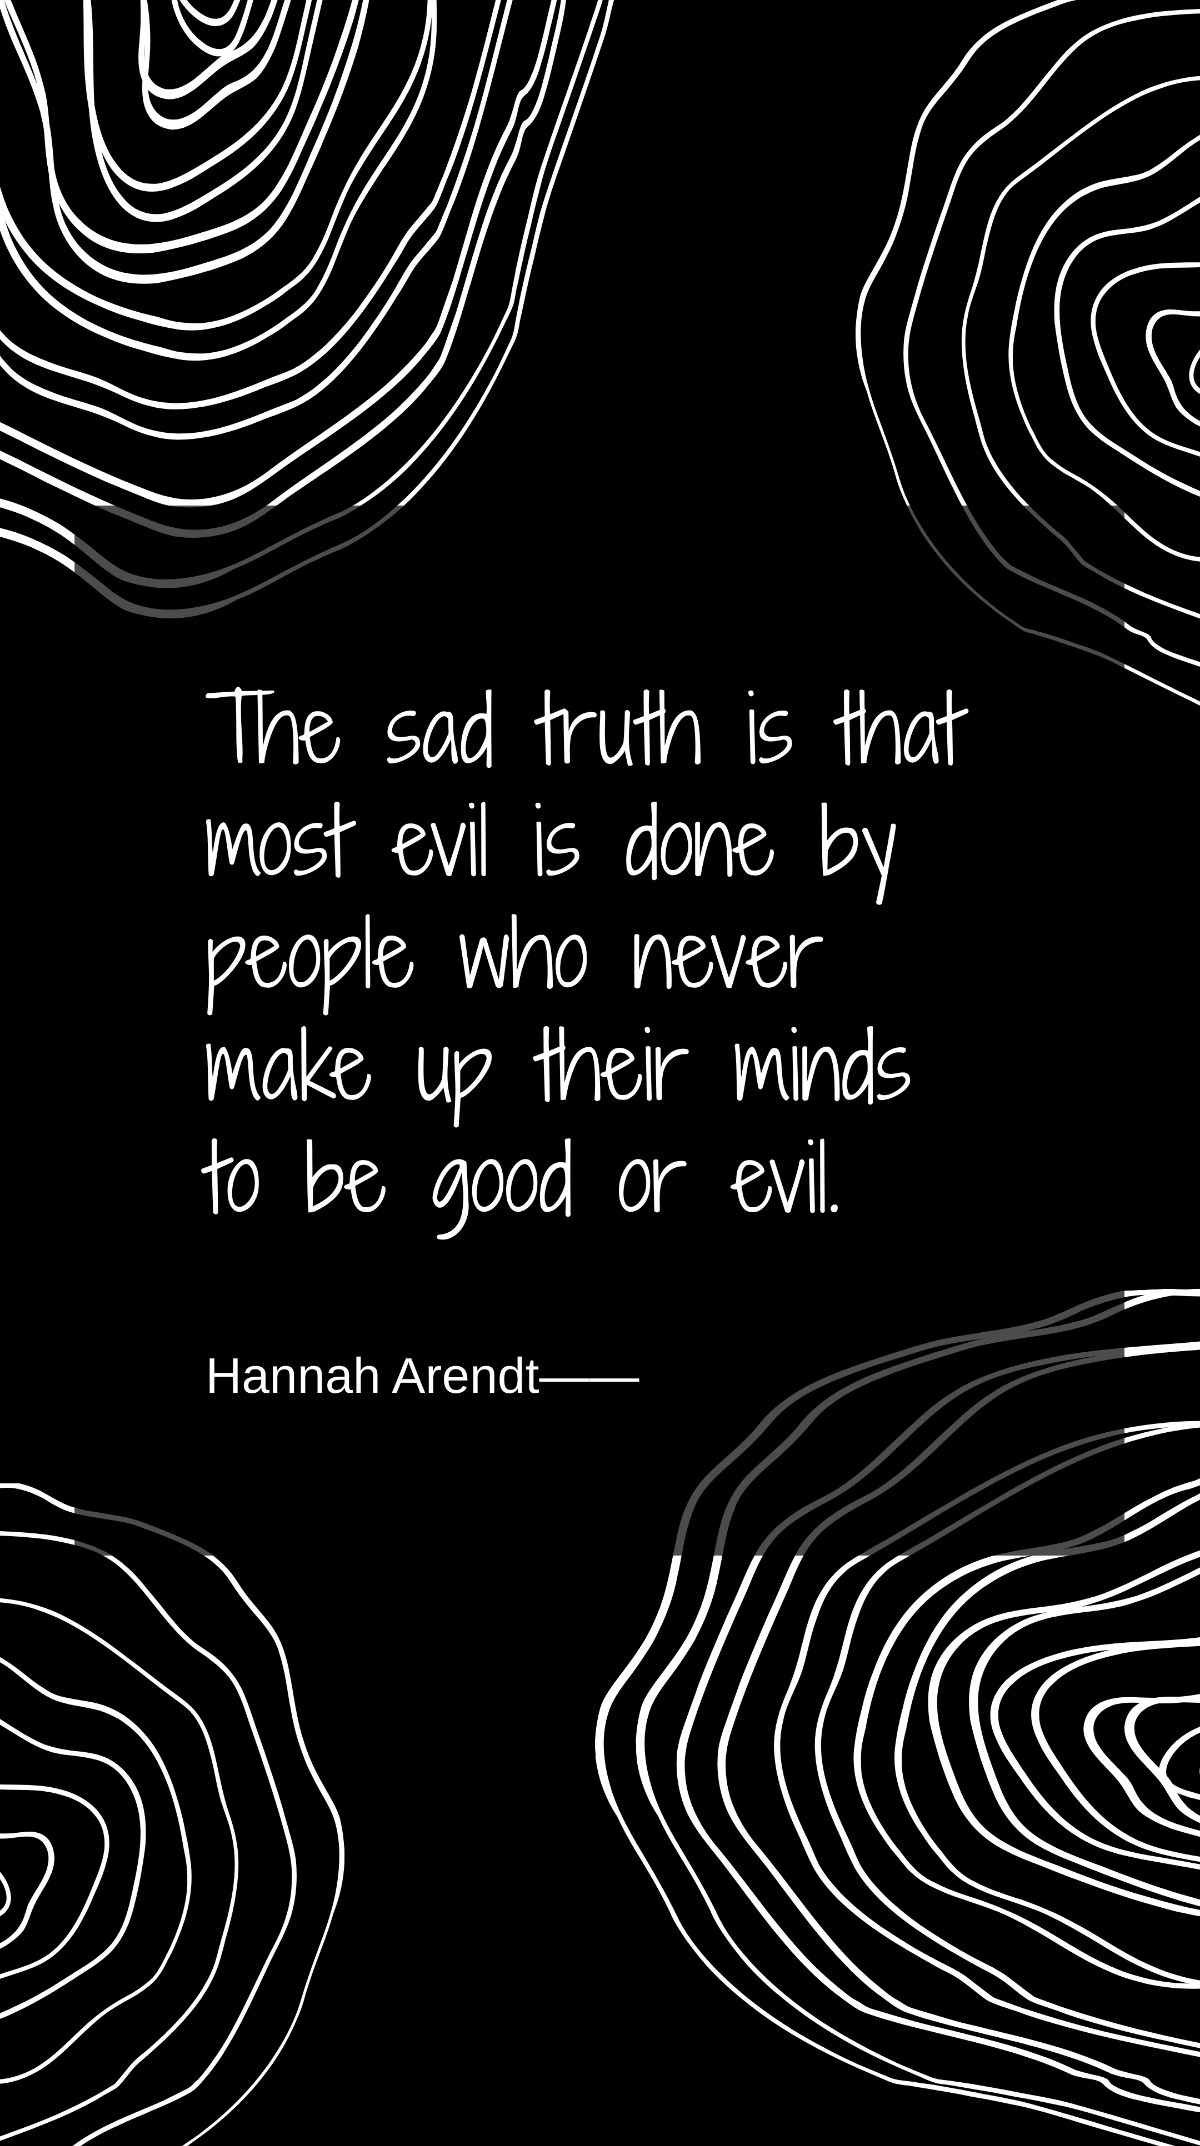 Hannah Arendt - The sad truth is that most evil is done by people who never make up their minds to be good or evil. Template